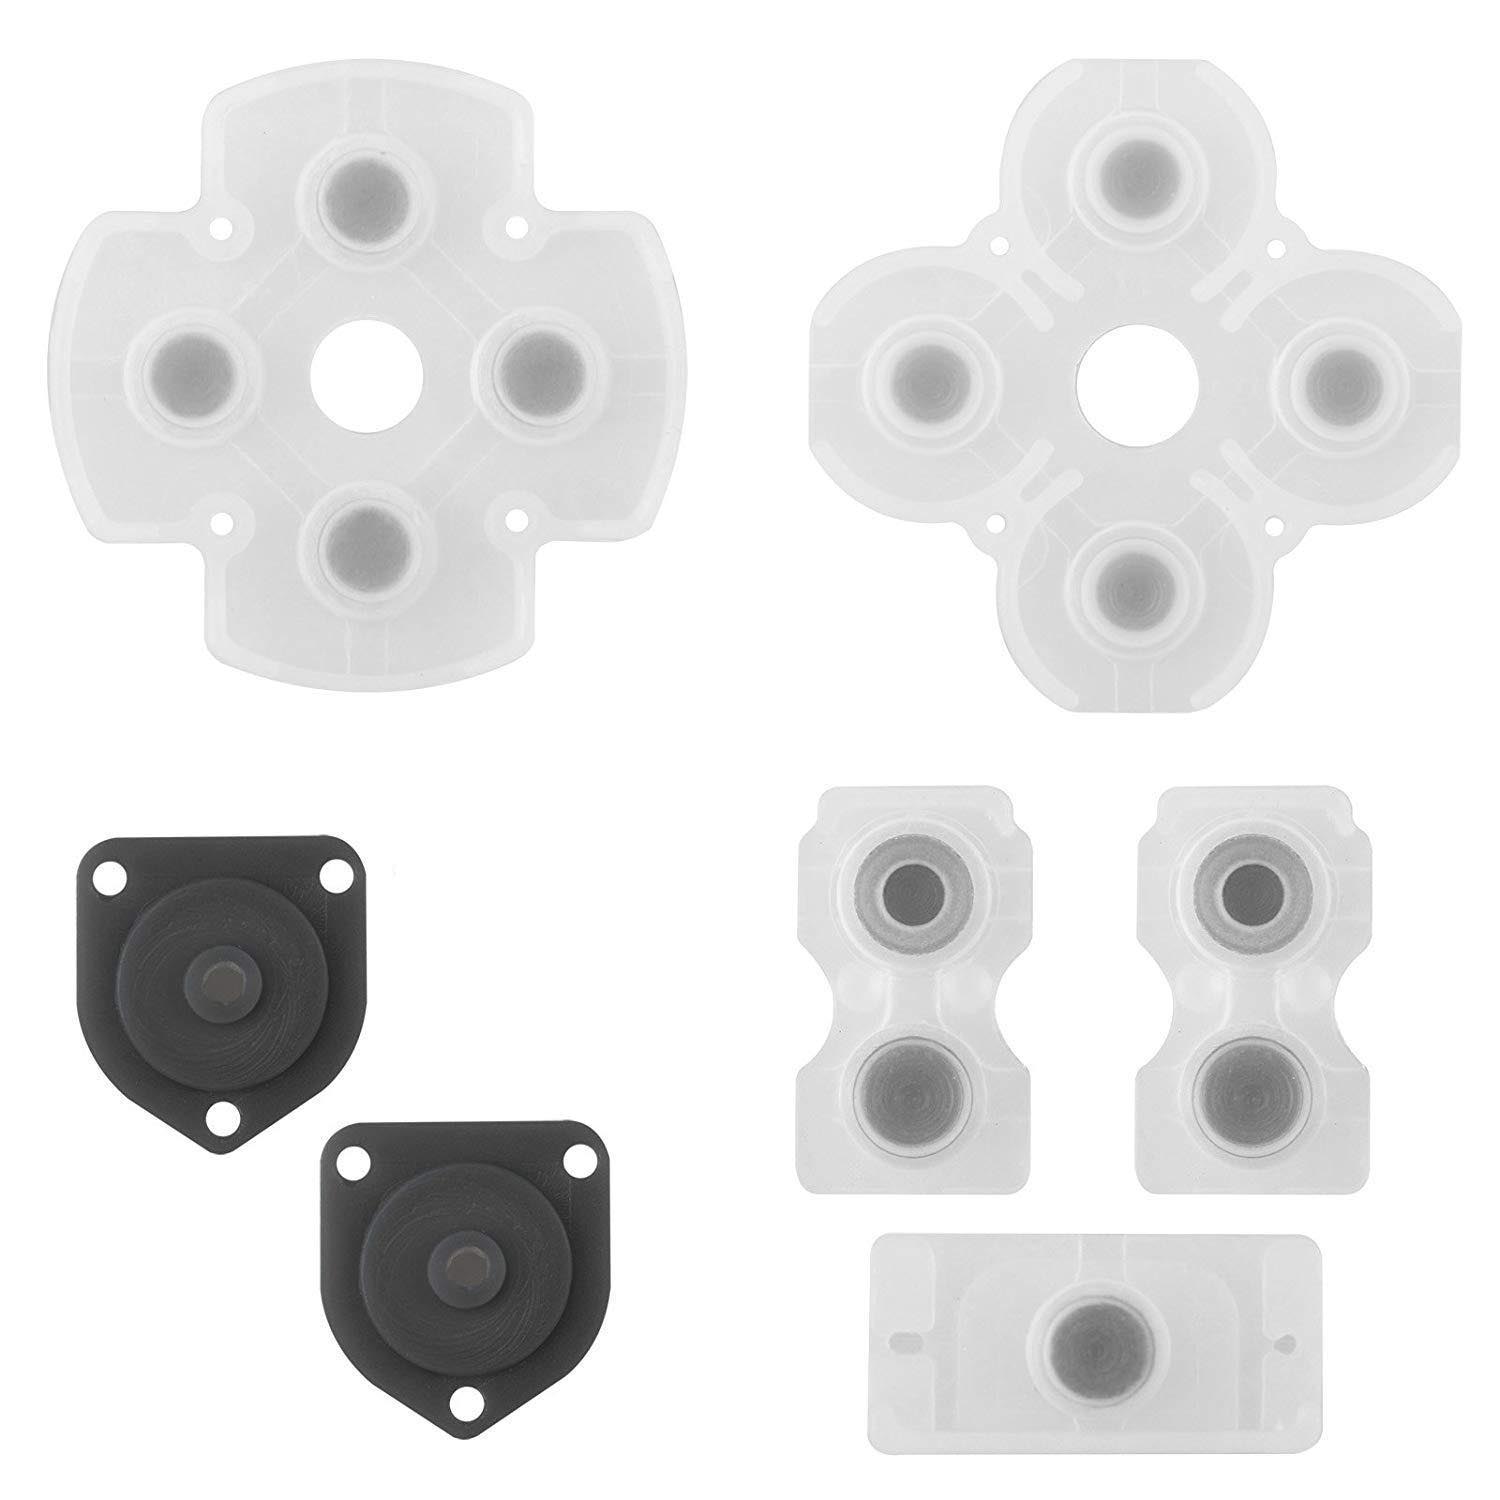 Conductive Rubber Pad Silicone Button Pads for PS4 Controller V1 JDM011 001